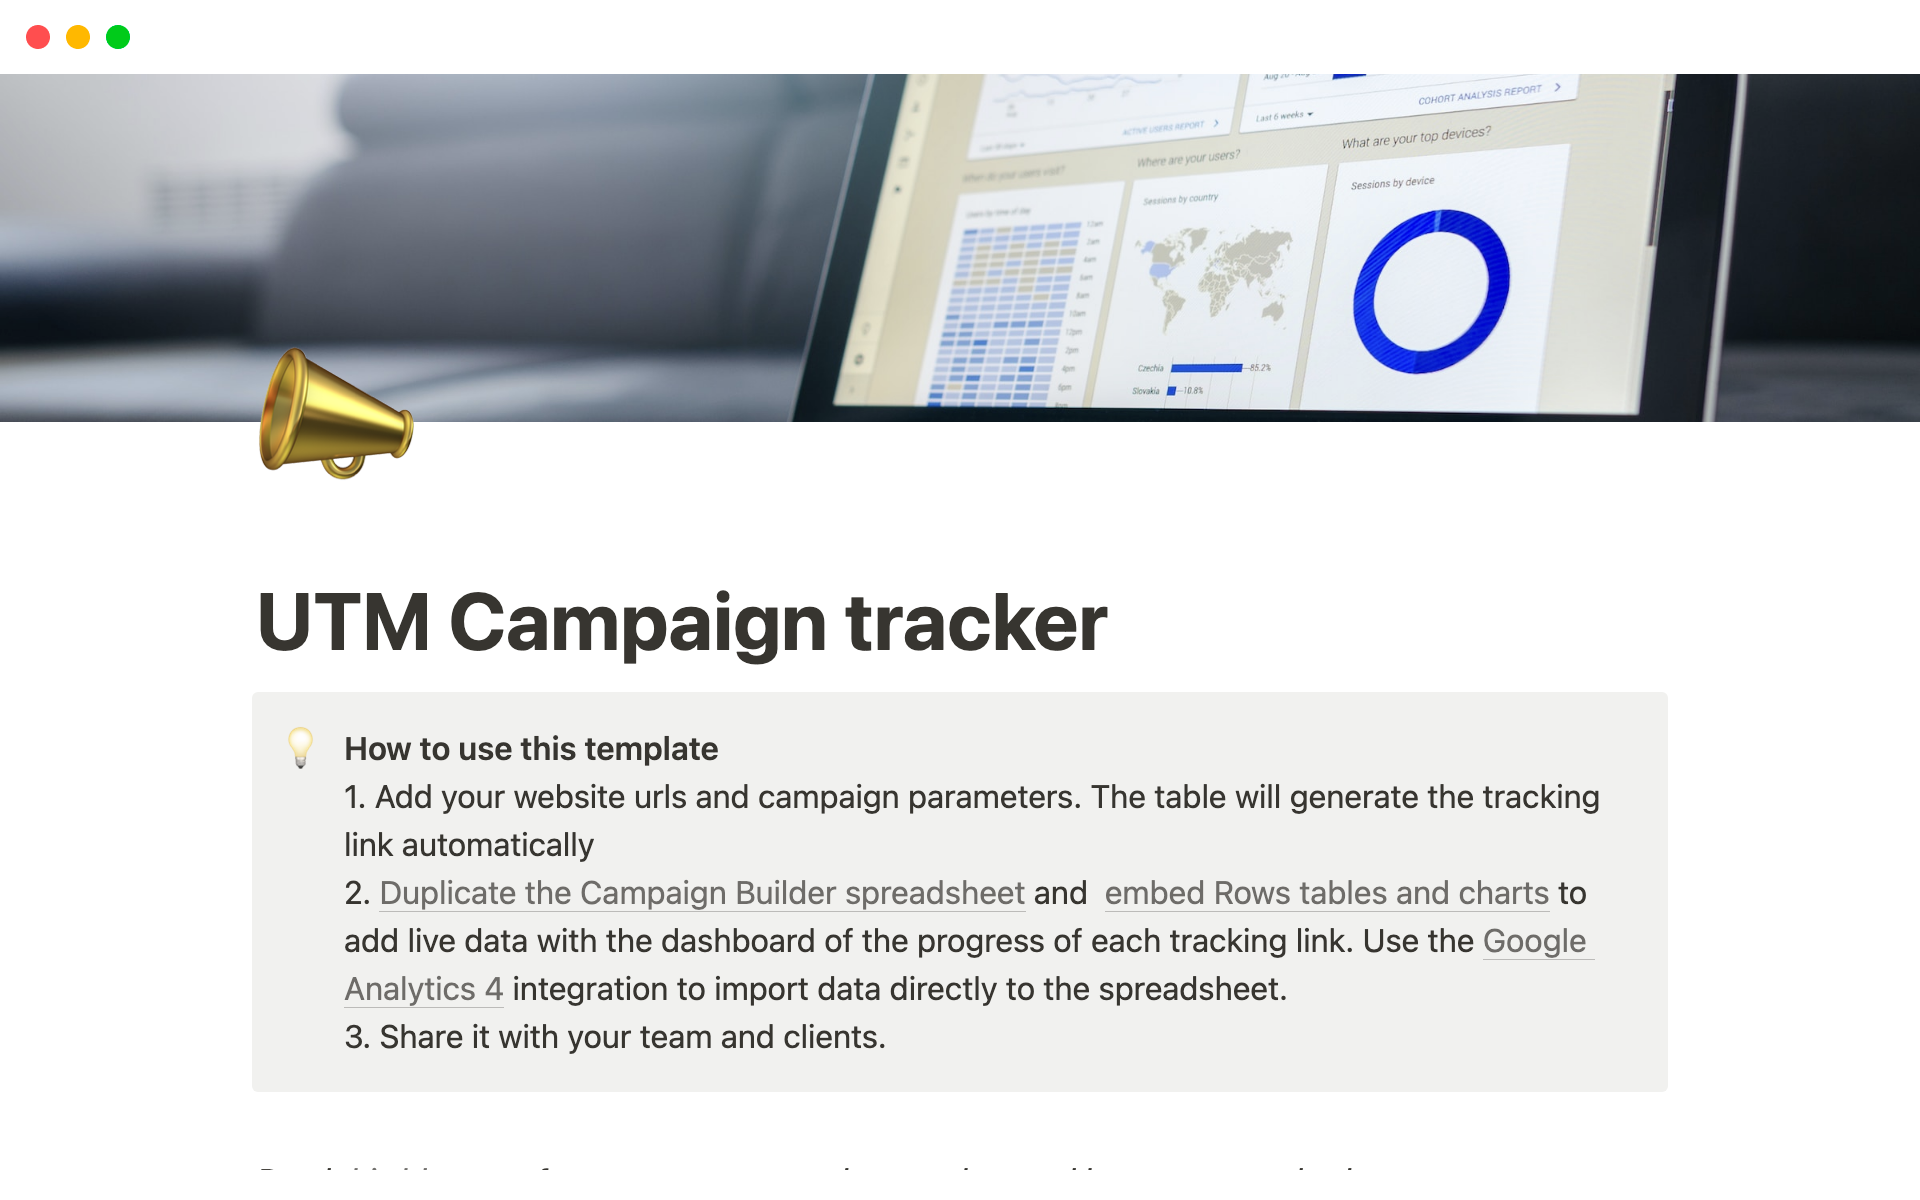 Build tracking links with UTM parameters and track the performance of our marketing campaigns across channels.